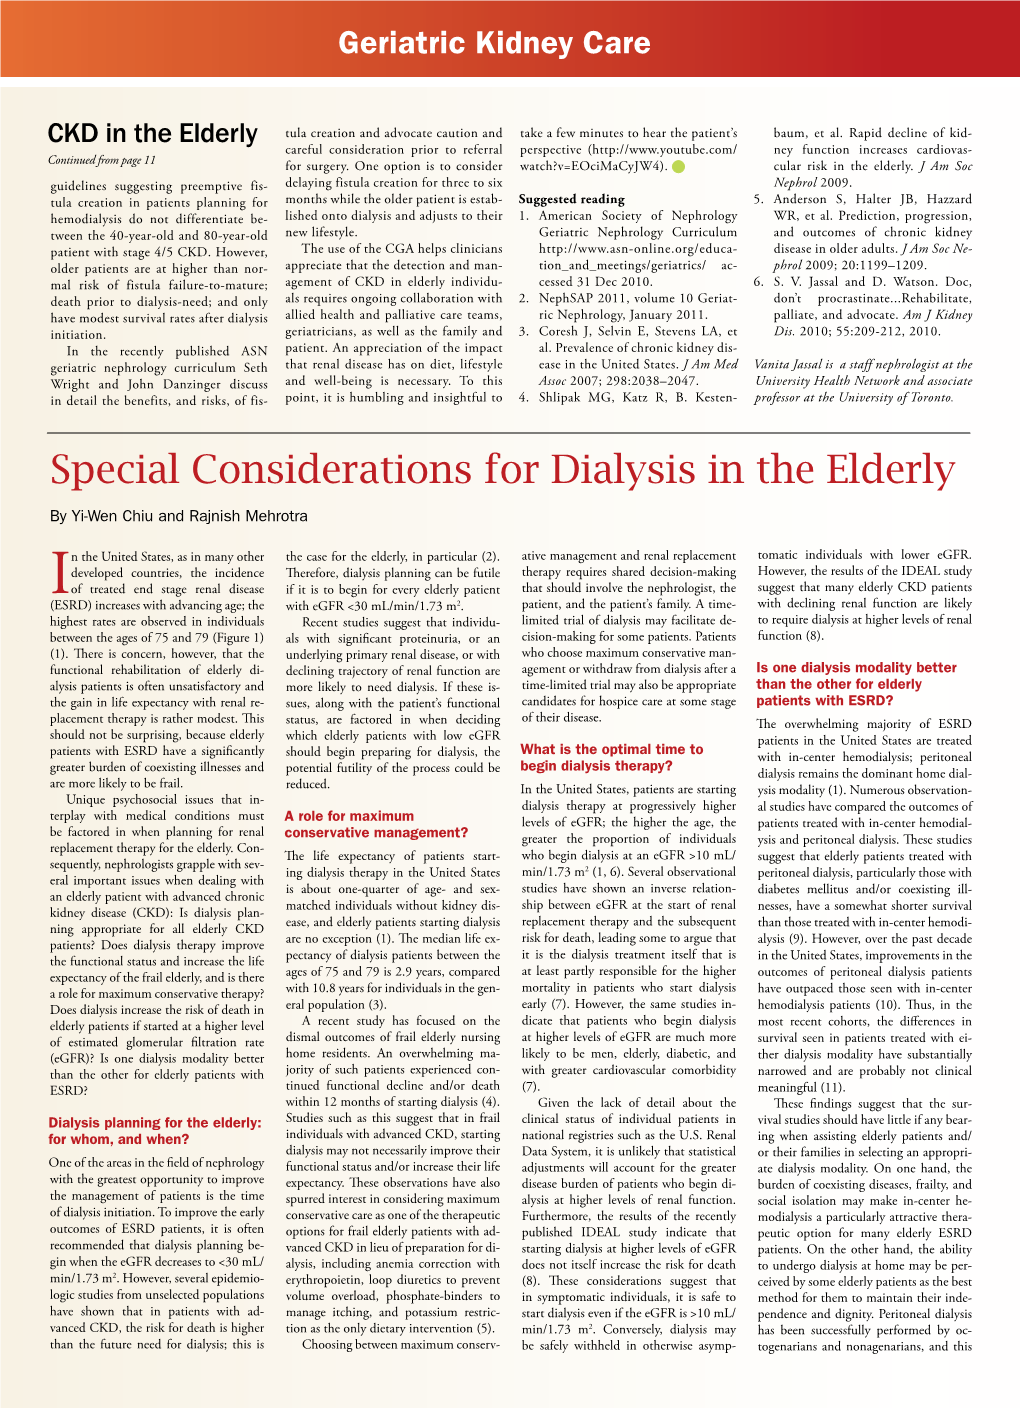 Special Considerations for Dialysis in the Elderly